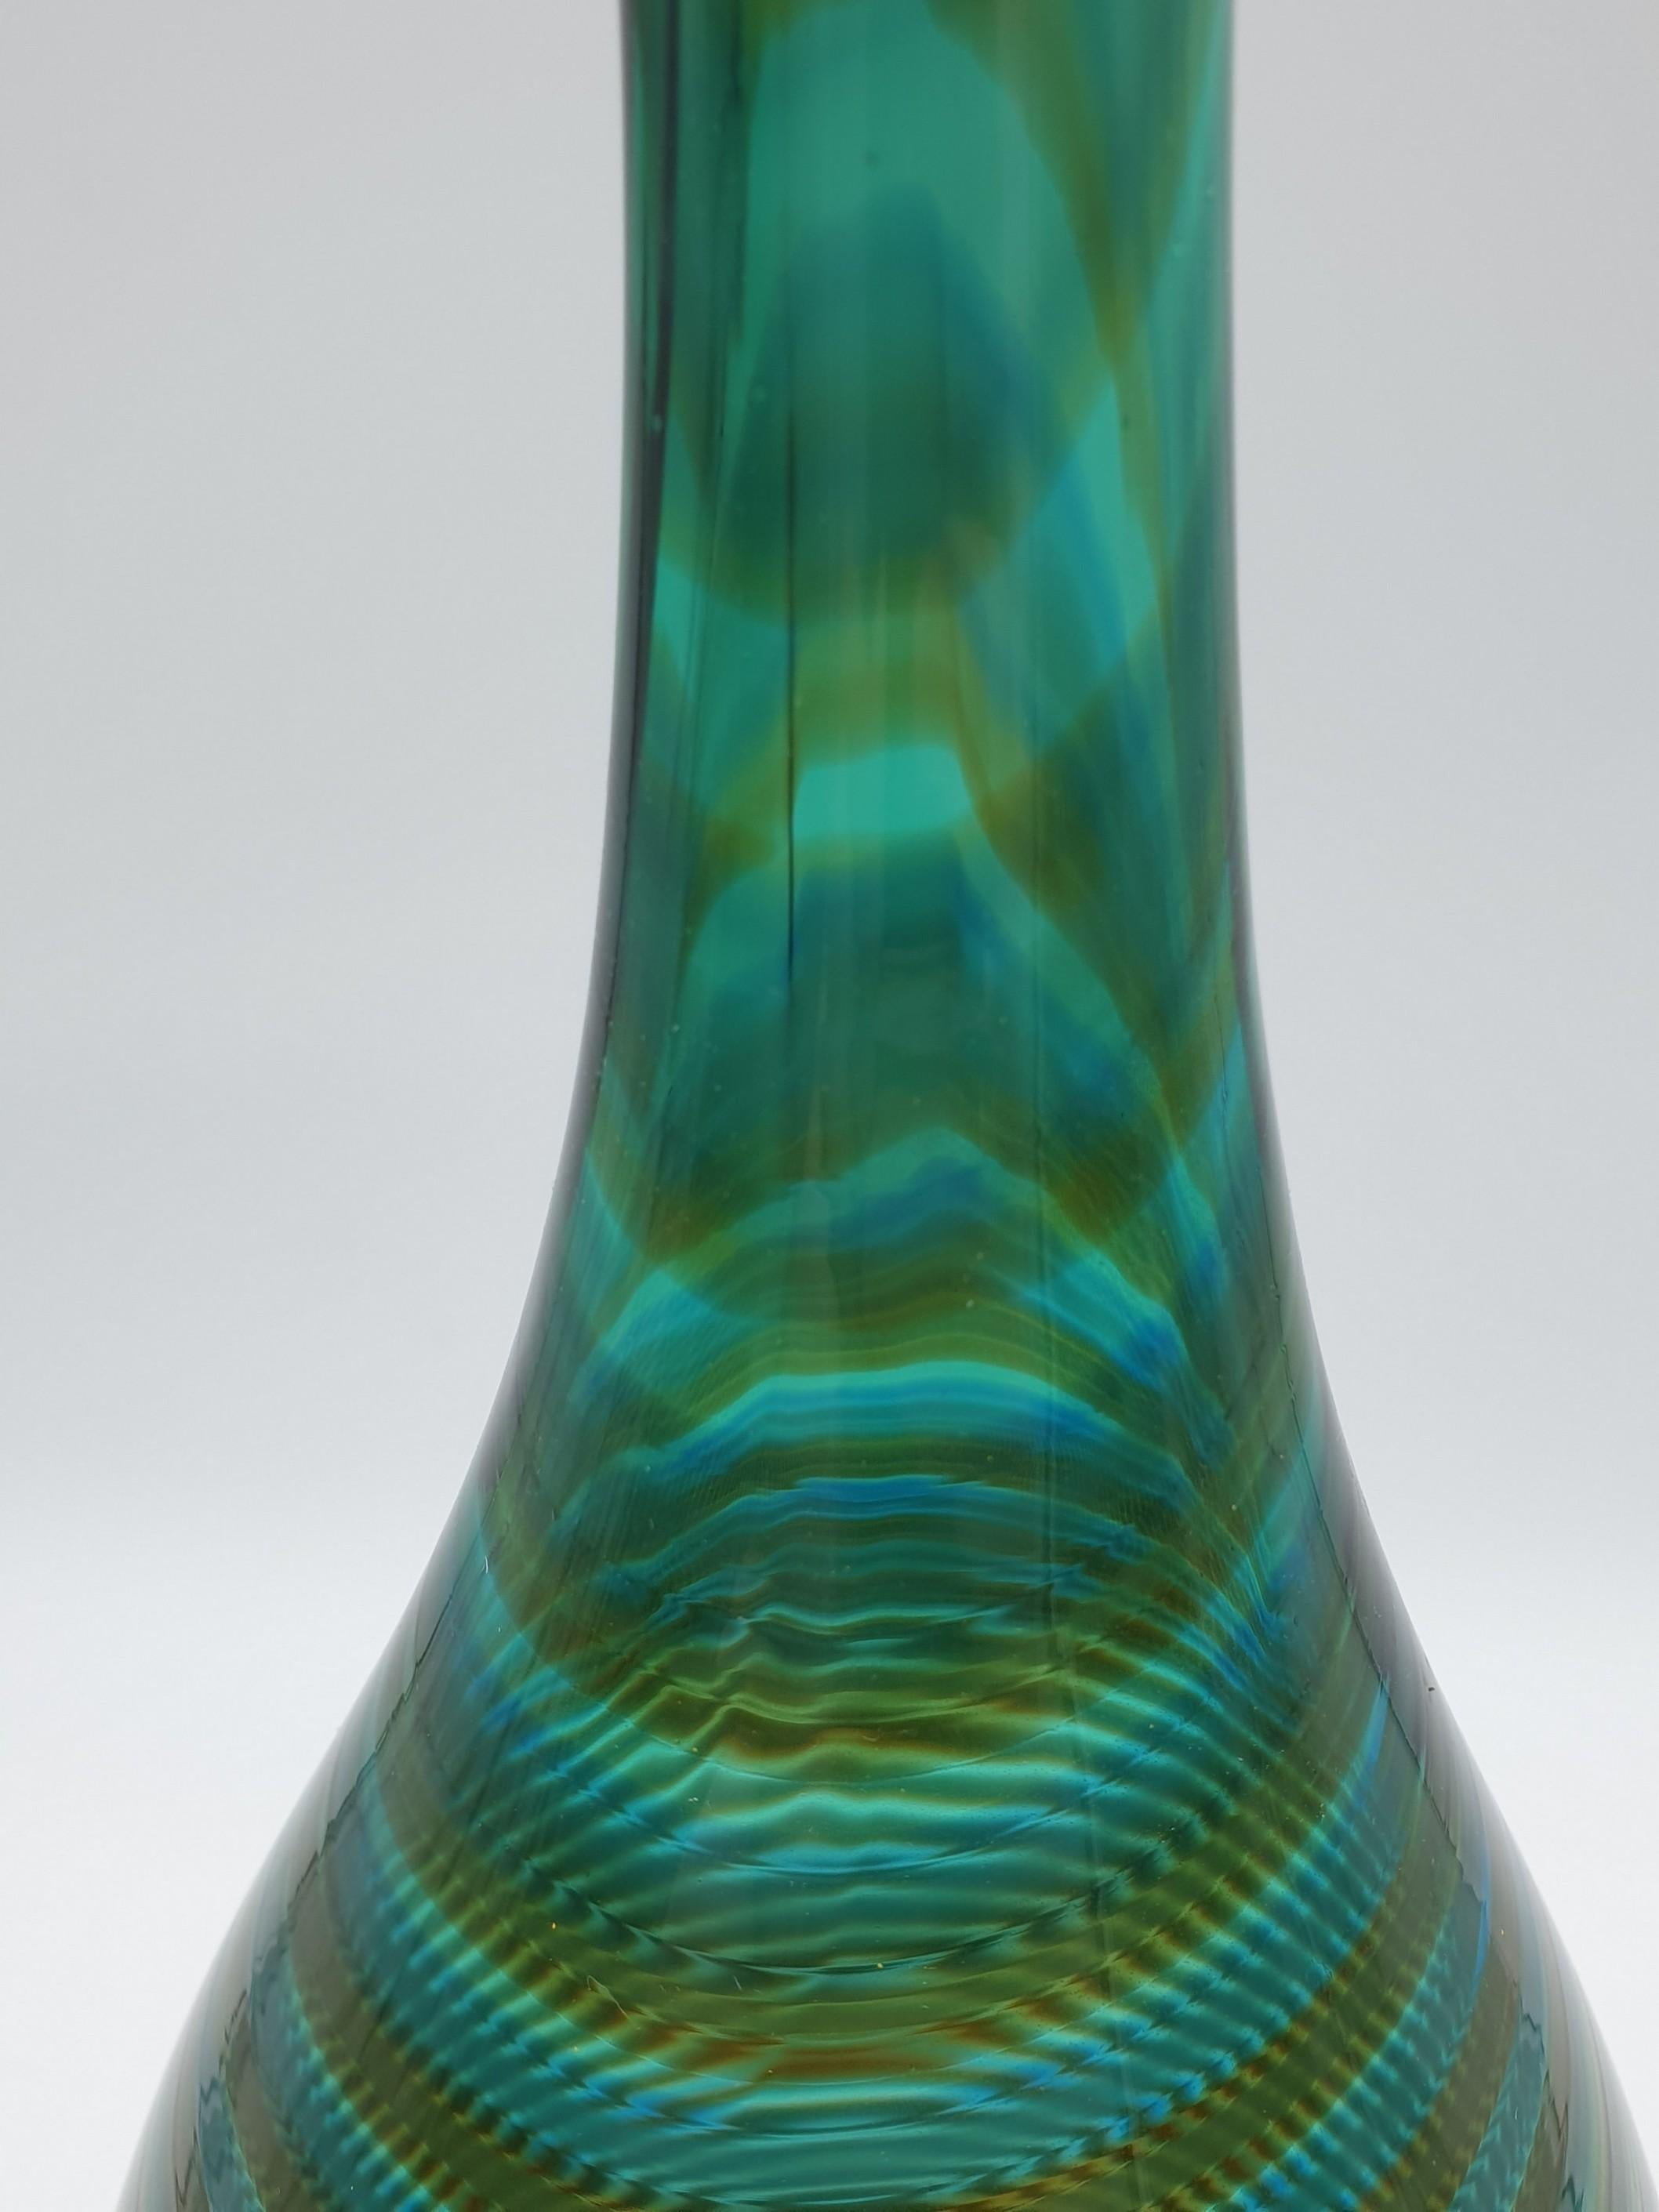 Pair of modern, stylish Murano-glass bottles made by Gino Cenedese e Figlio in the 1980s. These tall neck bottles, mouth-blown and completely handmade feature a rich emerald green color and an amber spiral that enhances their Silhouette. These